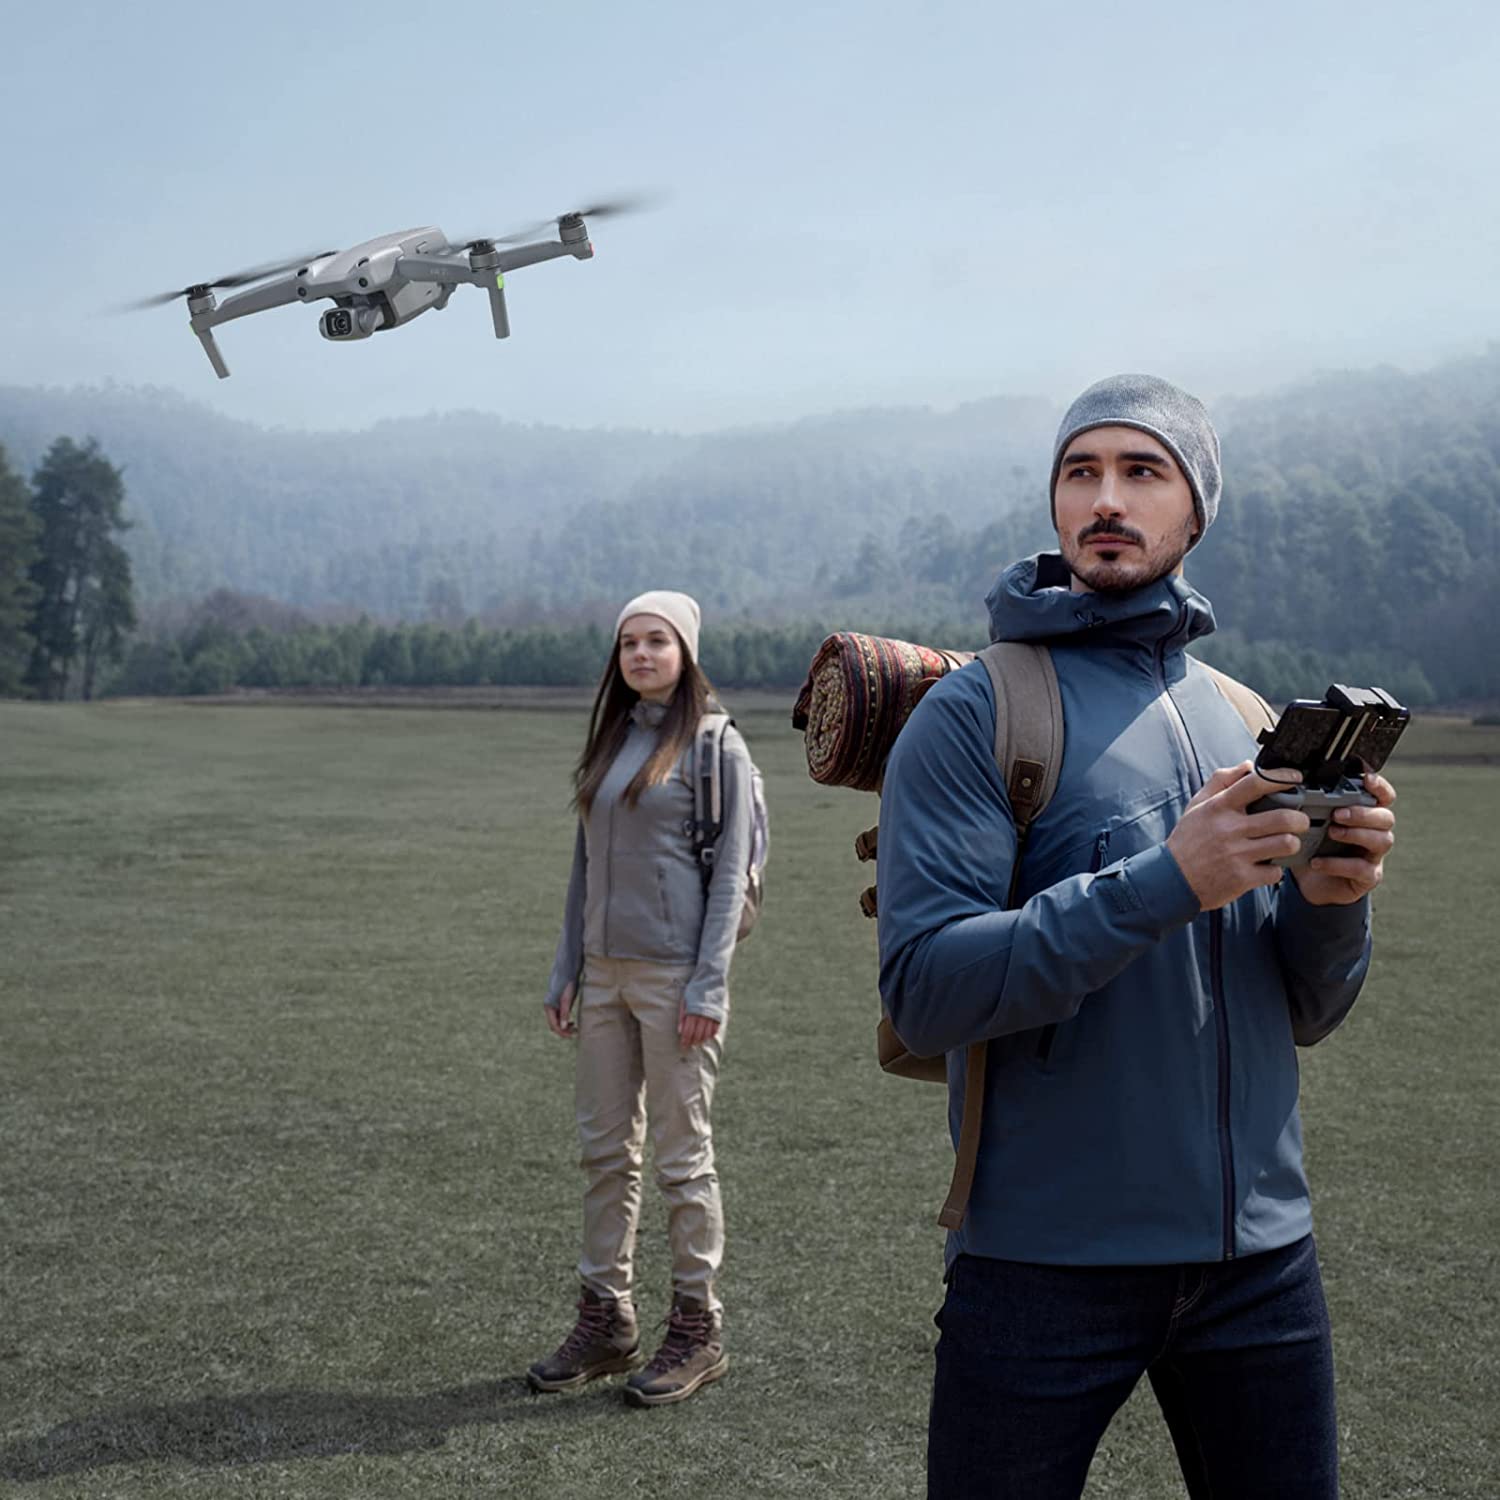 DJI Air 2S Fly More Combo with Smart Controller - Drone with 4K Camera, 5.4K Video, 1-Inch CMOS Sensor, 4 Directions of Obstacle Sensing, 31-Min Flight Time, Max 7.5-Mile Video Transmission, Gray